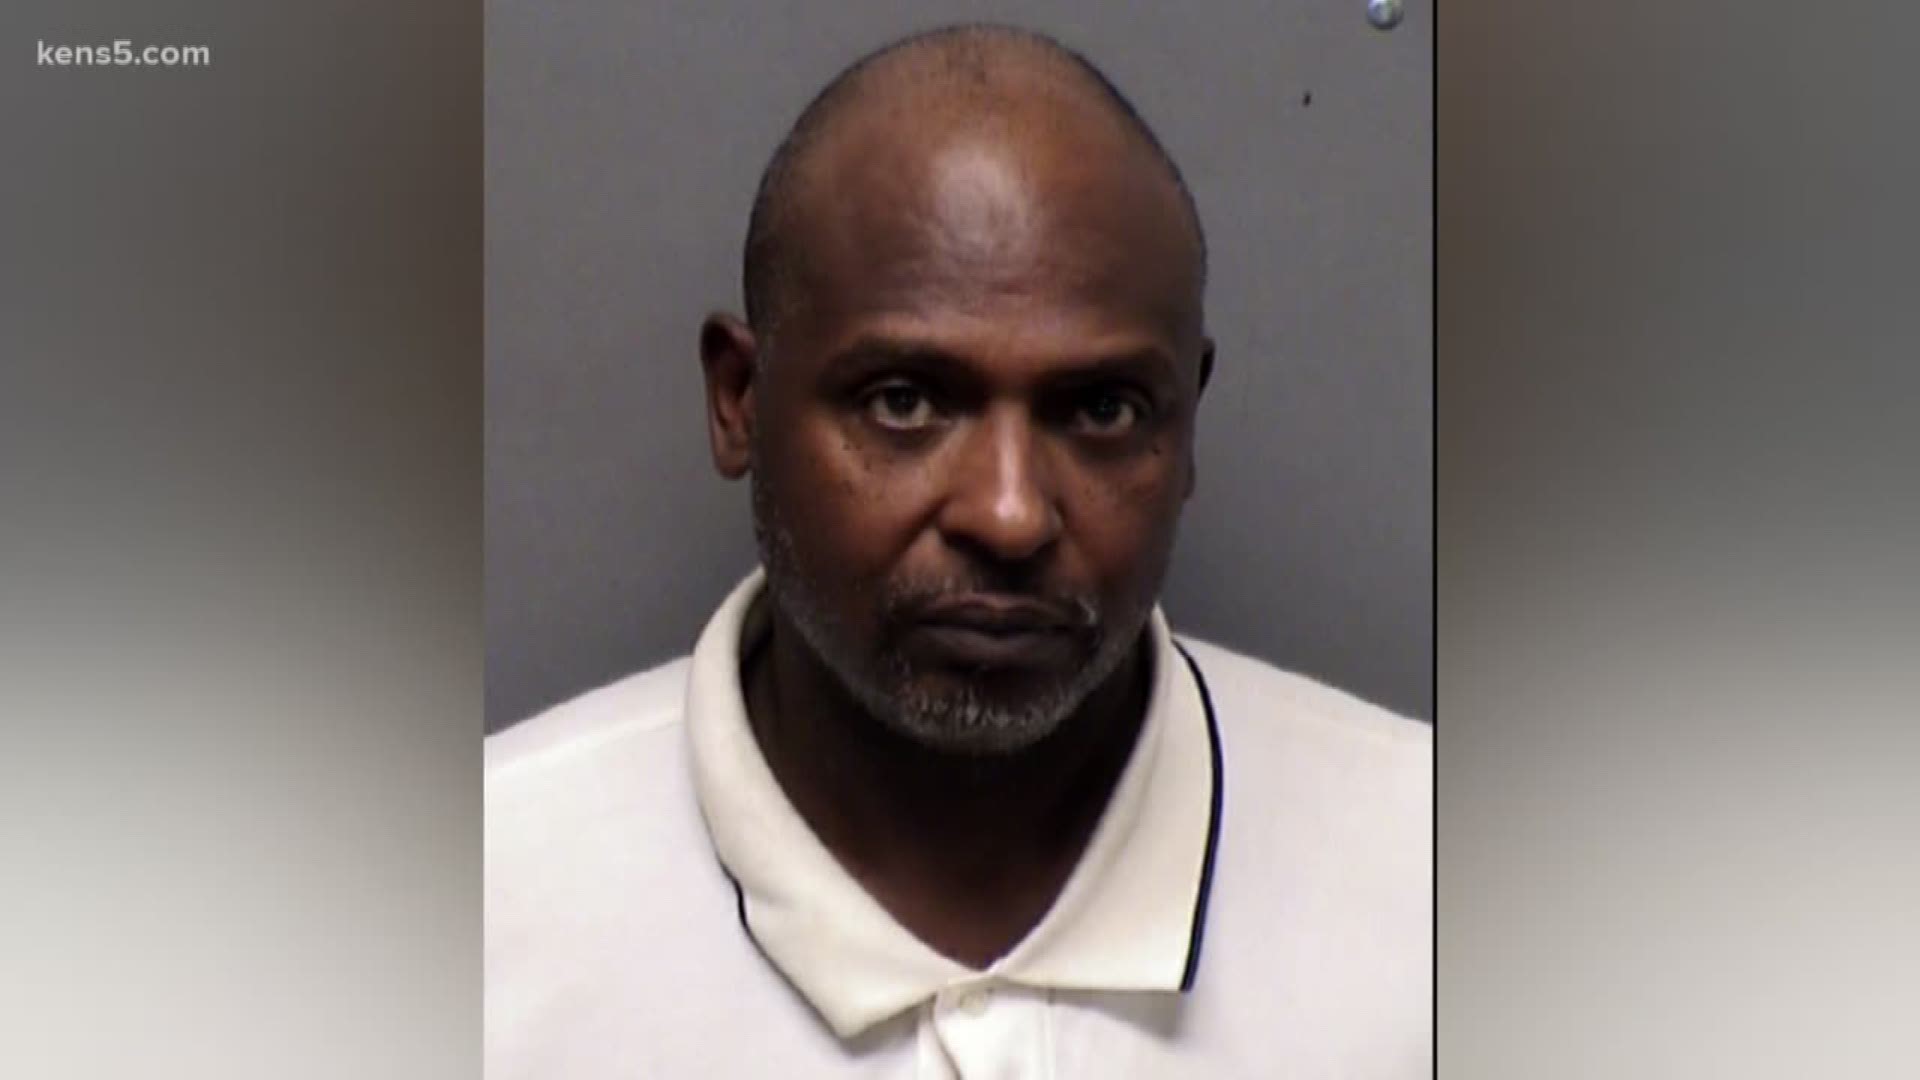 It turns out 51 year old Tommy Waldon had only been out of jail for a few days on a previous robbery charge. San Antonio Police say Waldon robbed a Boost Mobile store Friday.